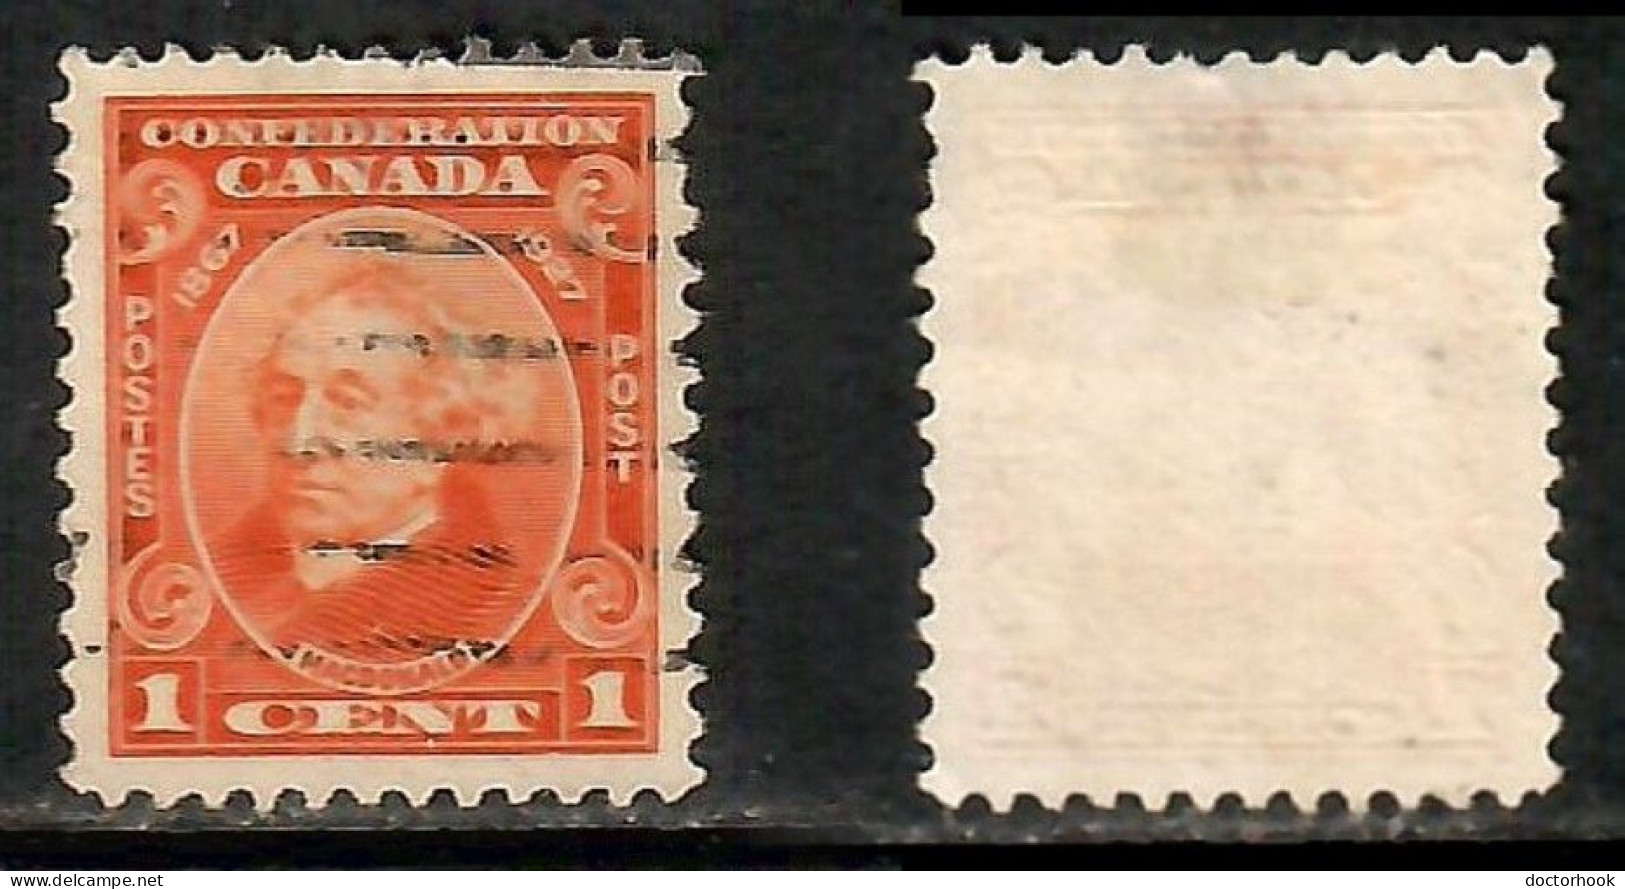 CANADA   Scott # 141 USED (CONDITION AS PER SCAN) (CAN-184) - Oblitérés